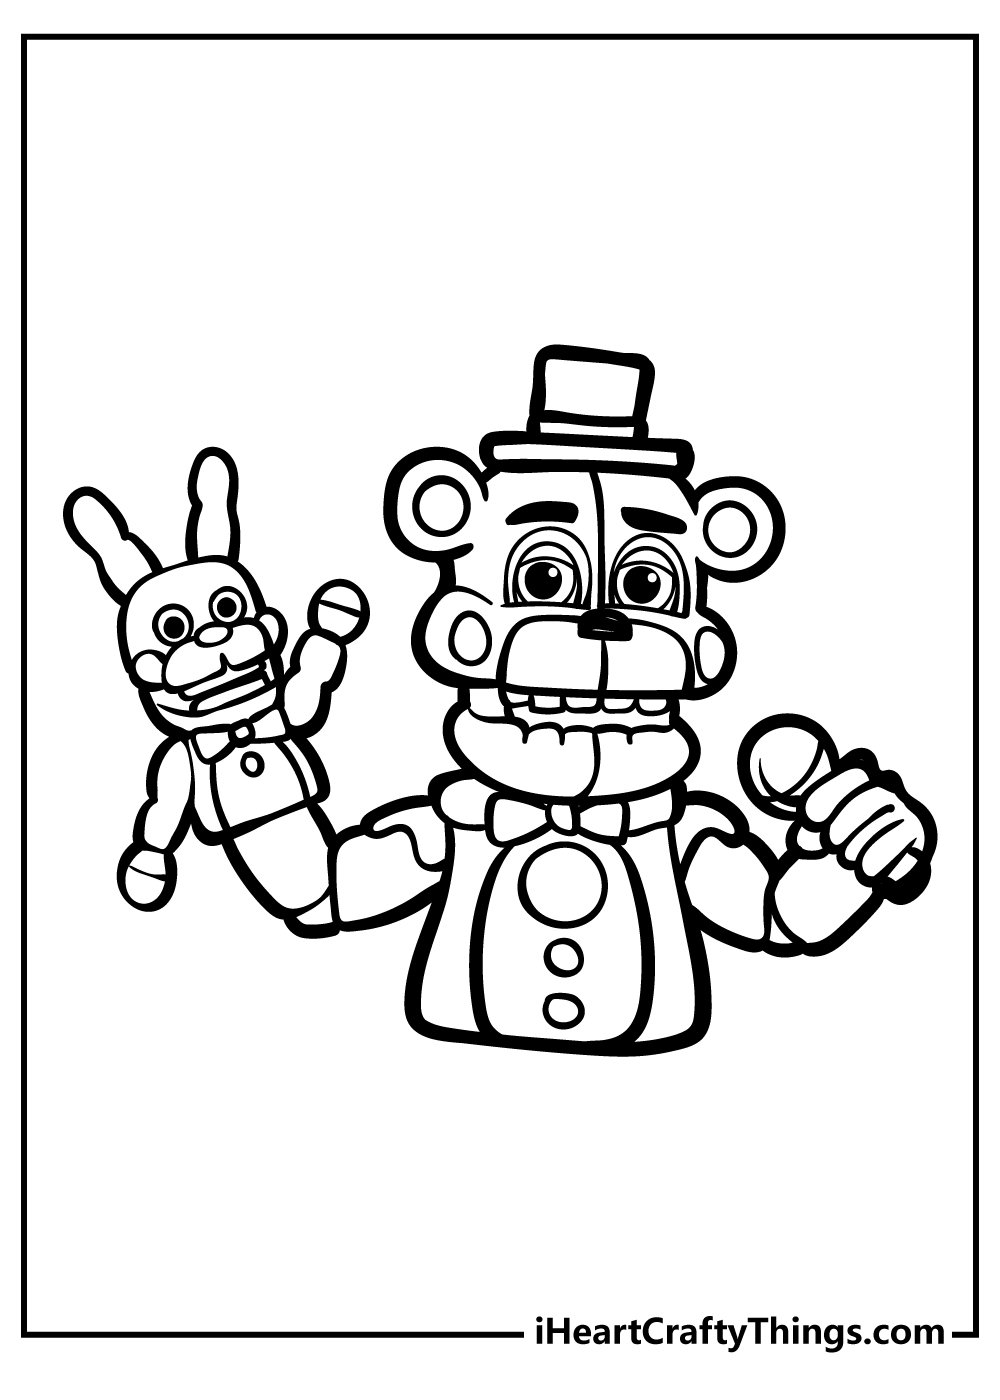 Five night at freddys coloring pages